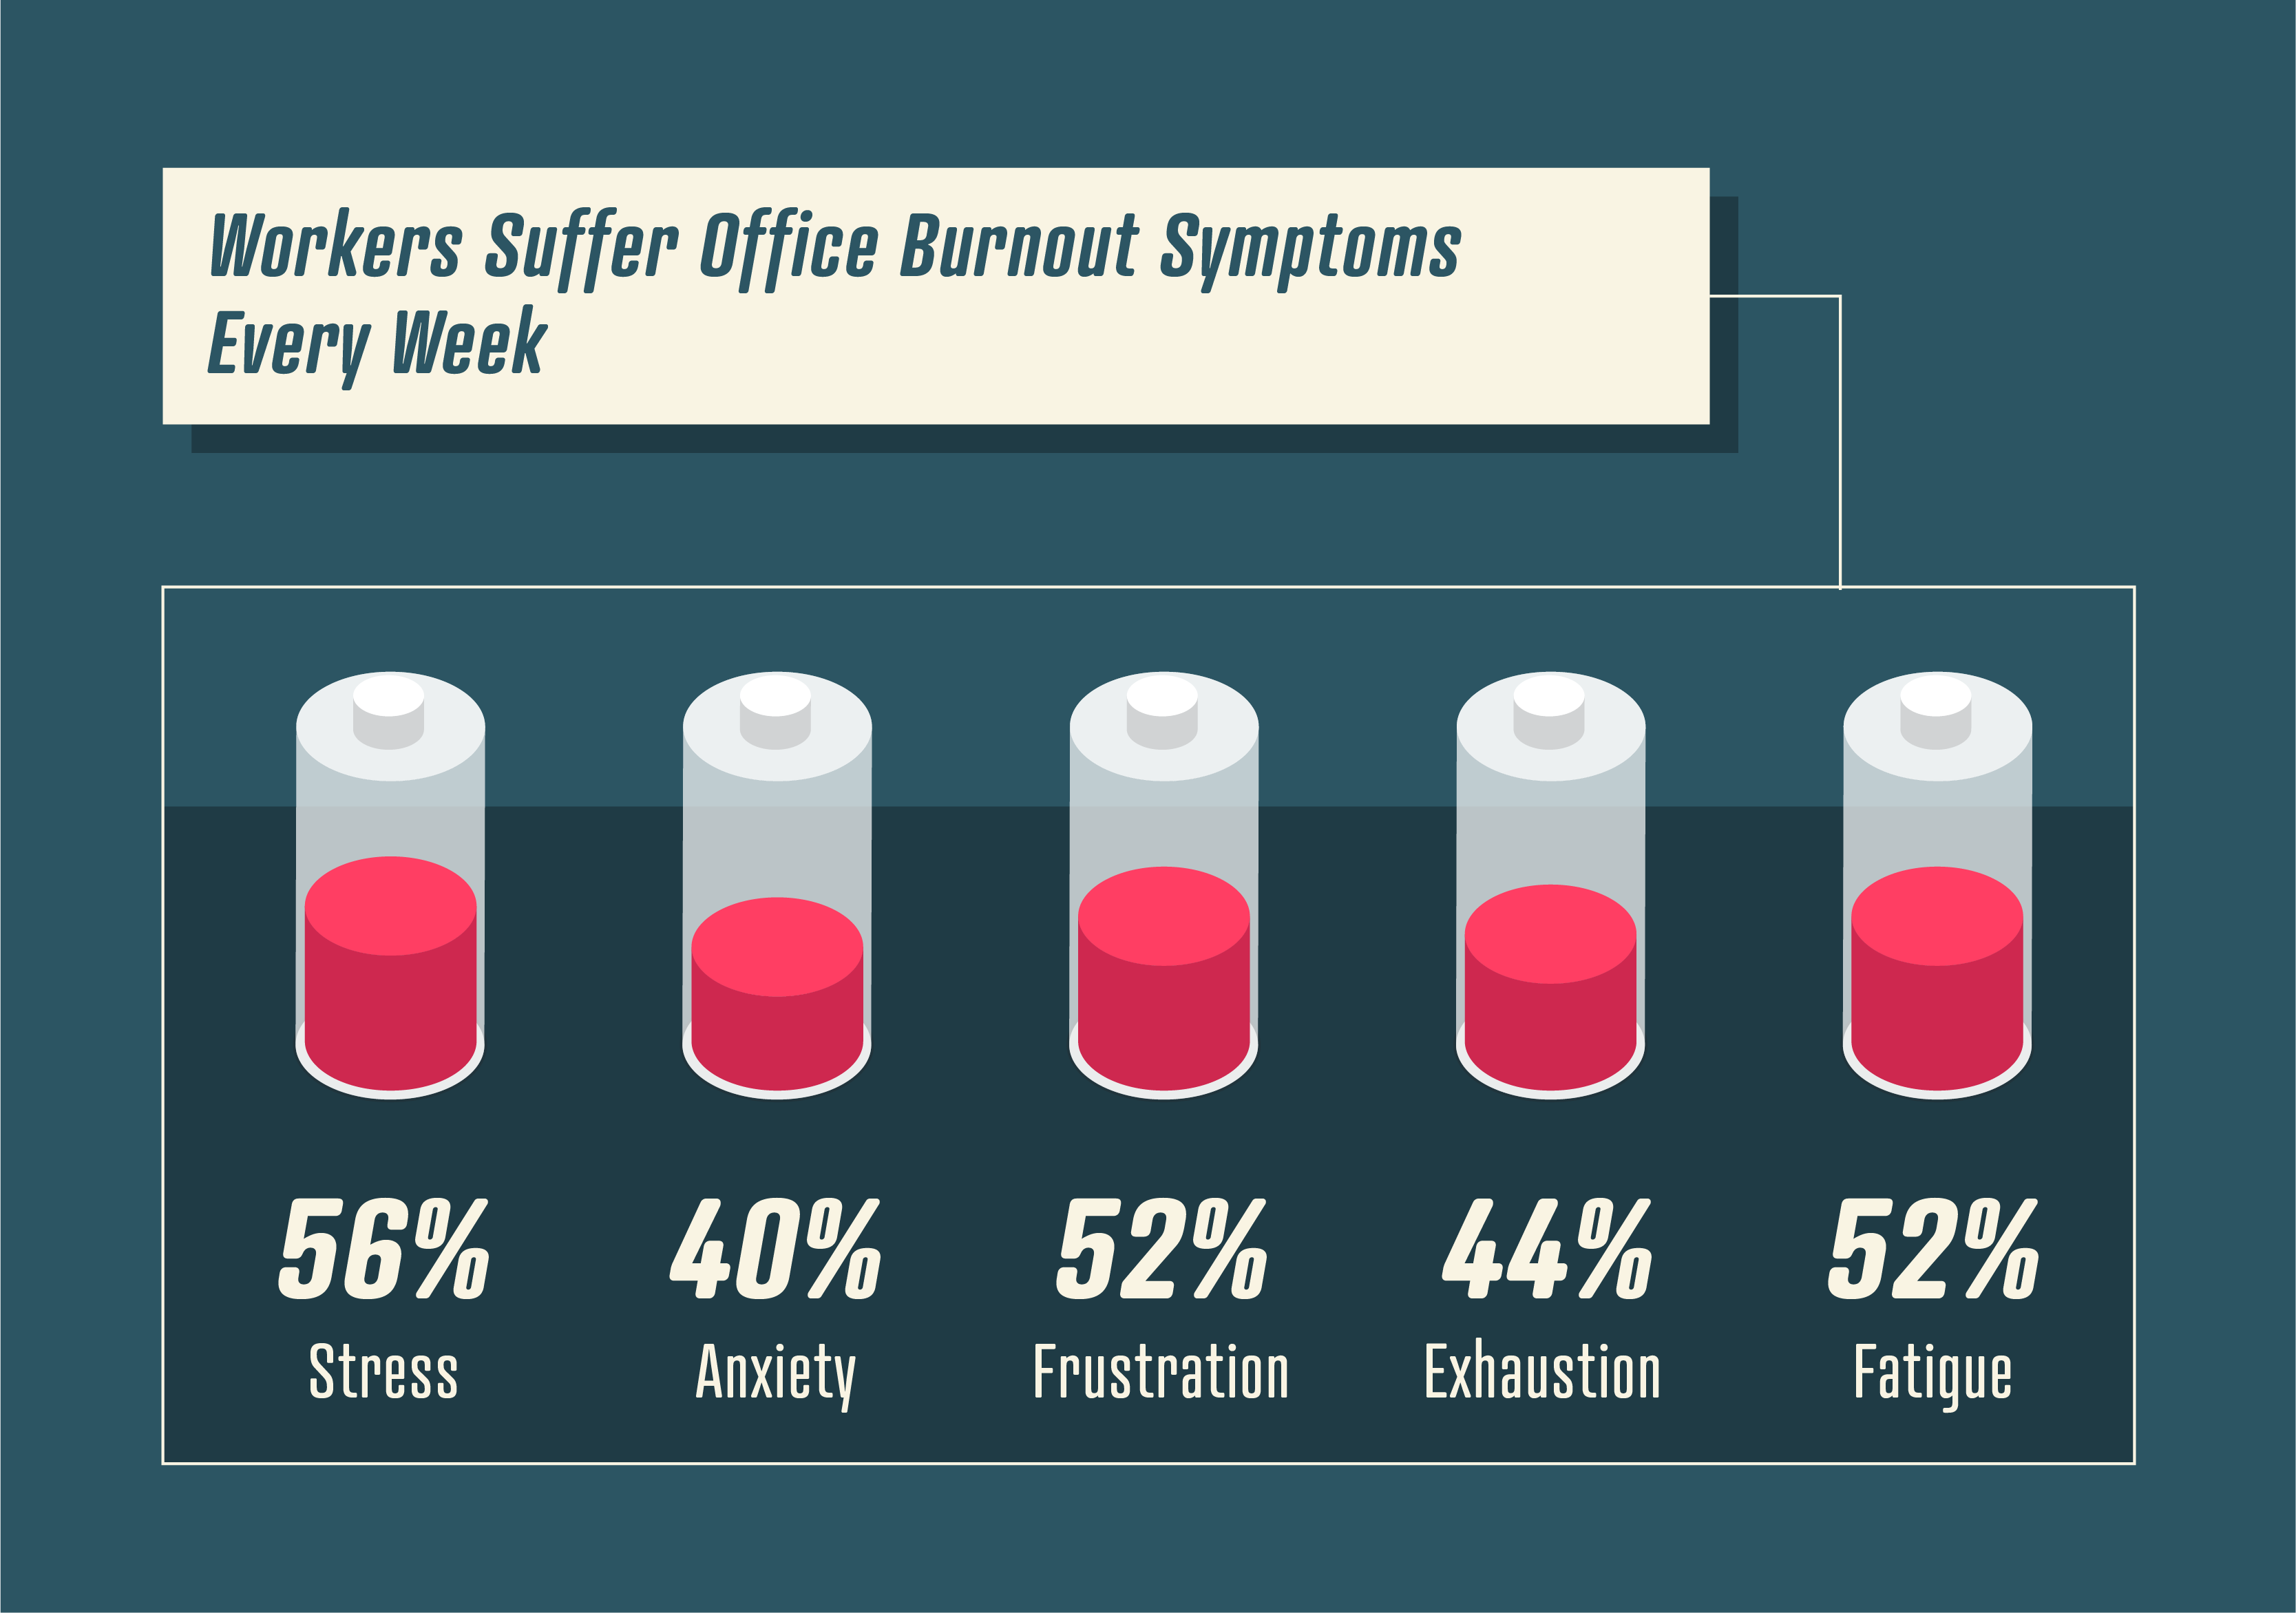 Whitepaper: The Extent of Workplace Burnout in Modern America - TollFreeForwarding.com